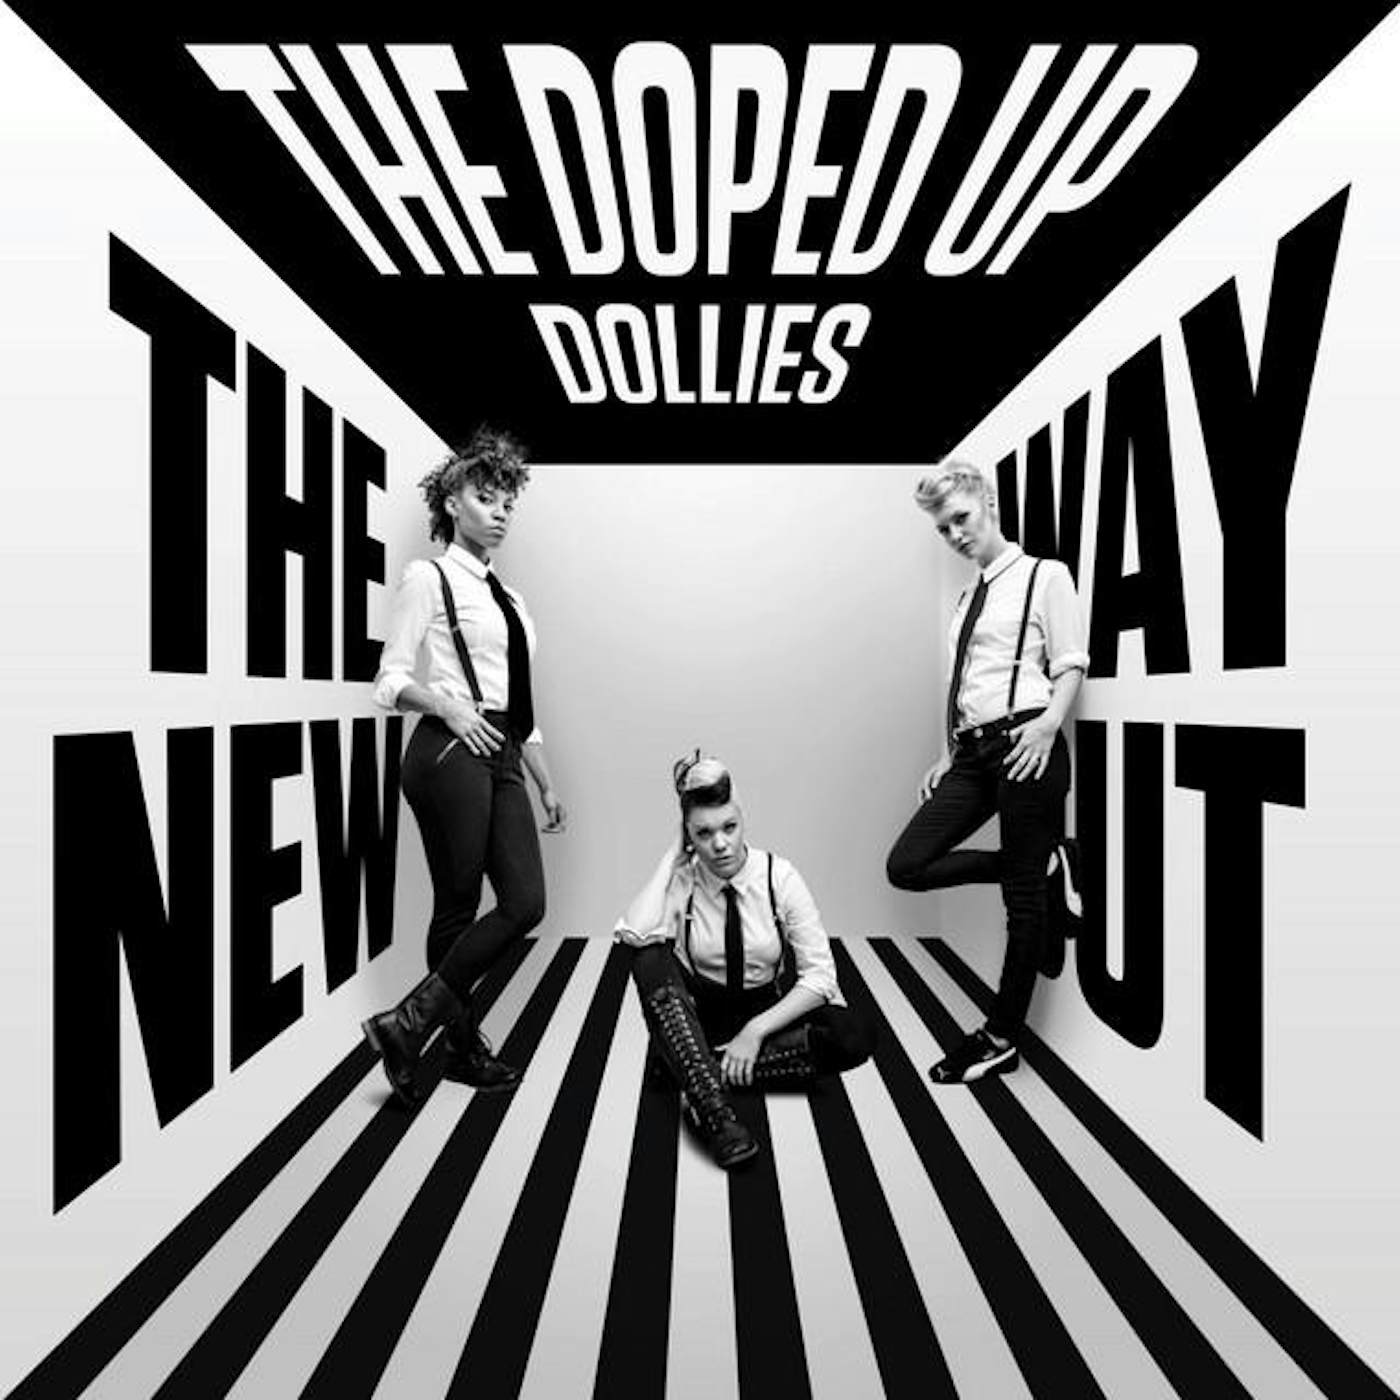 The Doped up Dollies